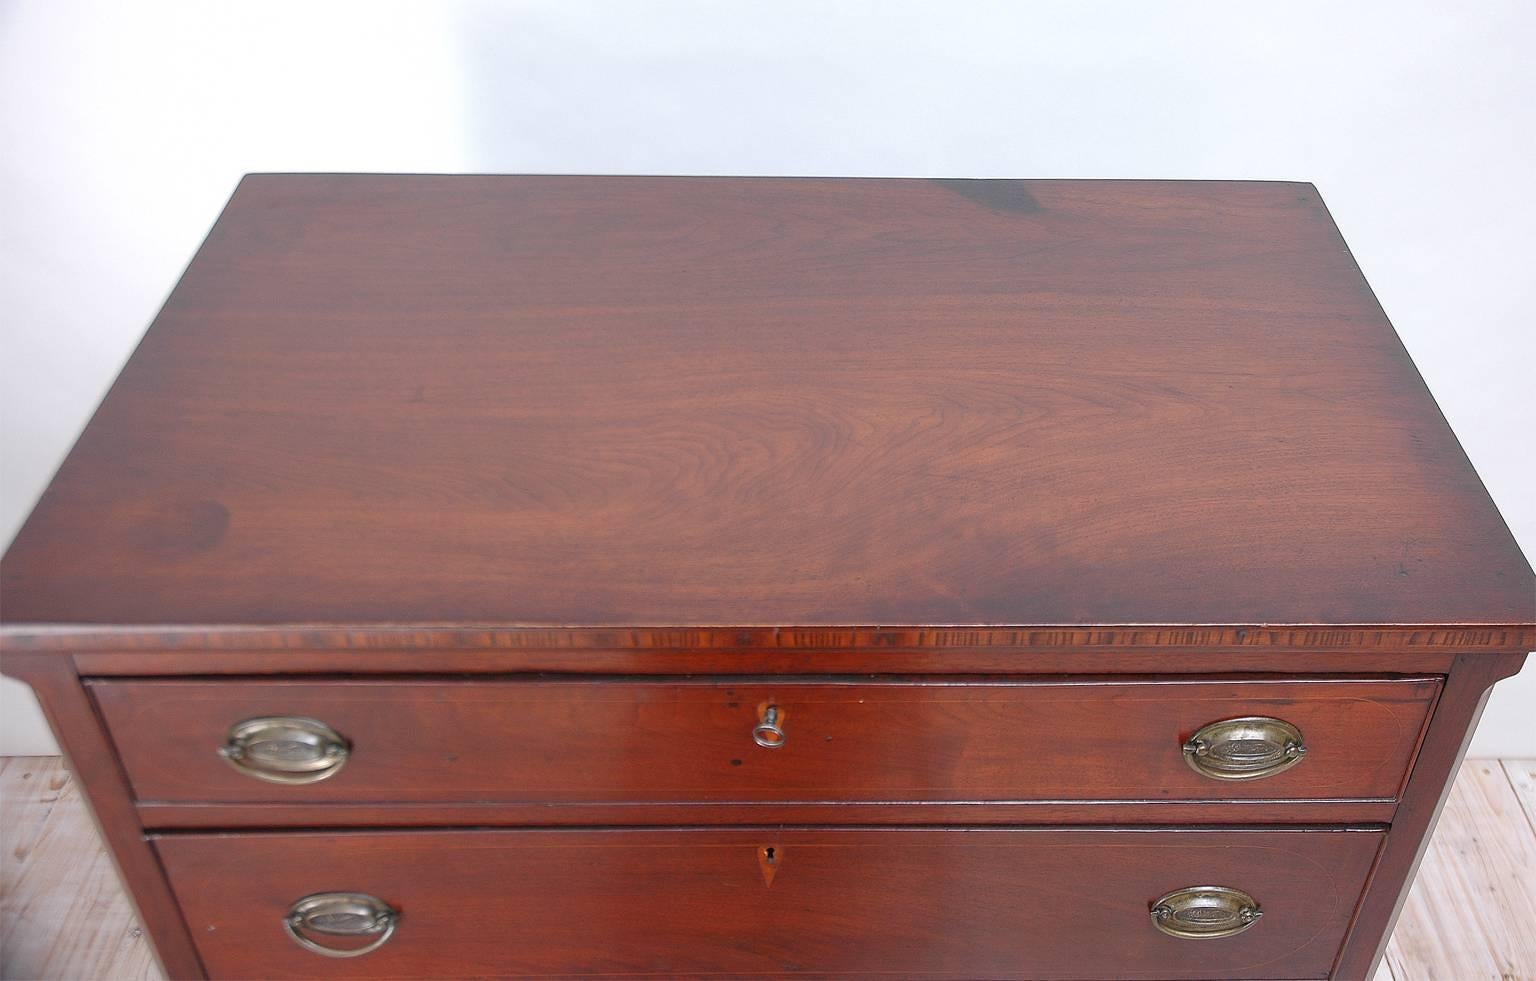 A Hepplewhite chest in mahogany with four graduated drawers with inlaid key plates and original pulls depicting cornucopias. Decorative elements include line inlays around drawers, banding along top edge, and an inlaid pinwheel on apron, with cyma